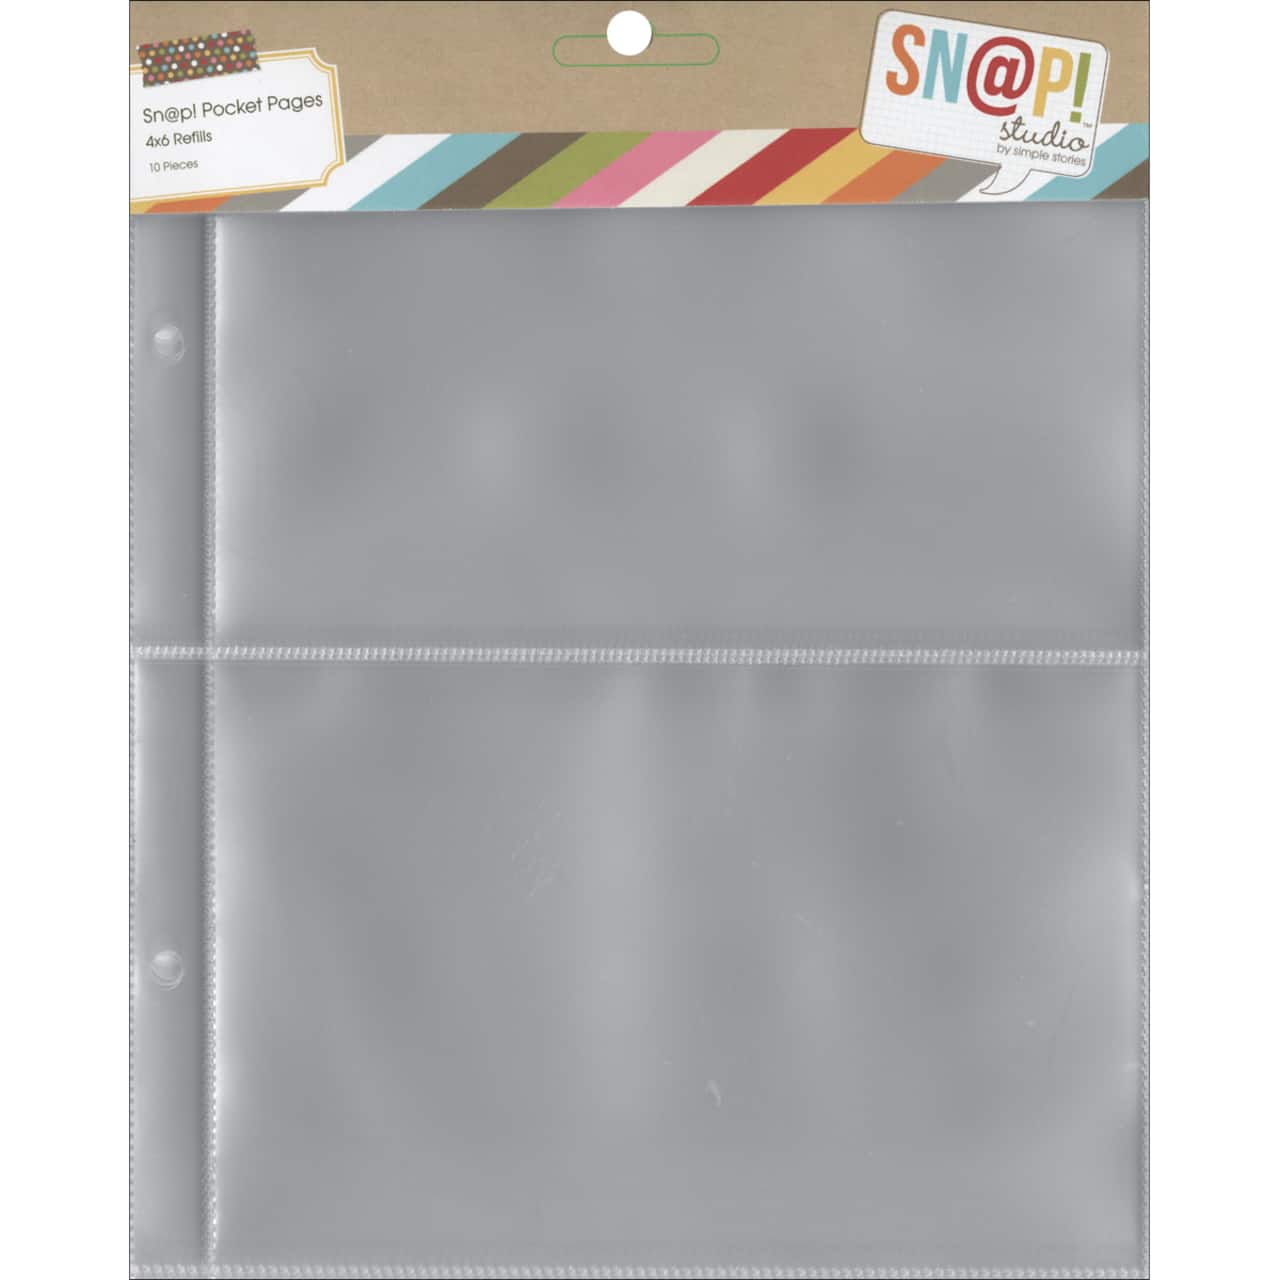 Simple Stories Sn@p!™ 4 x 6 Pocket Pages for 6 x 8 Binders, 10ct.